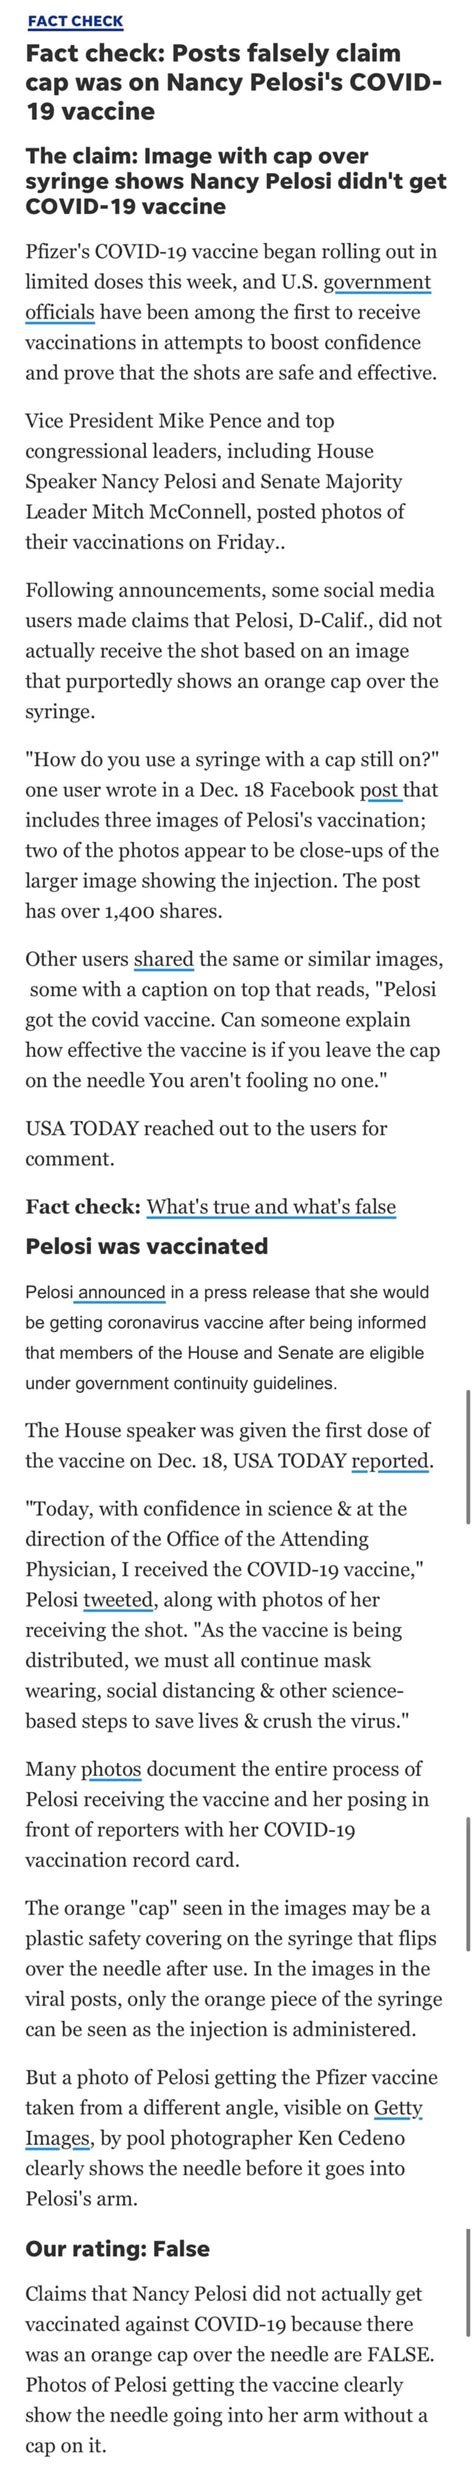 We're still learning how vaccines will affect the spread of. FACT CHECK Fact check: Posts falsely claim cap was on ...